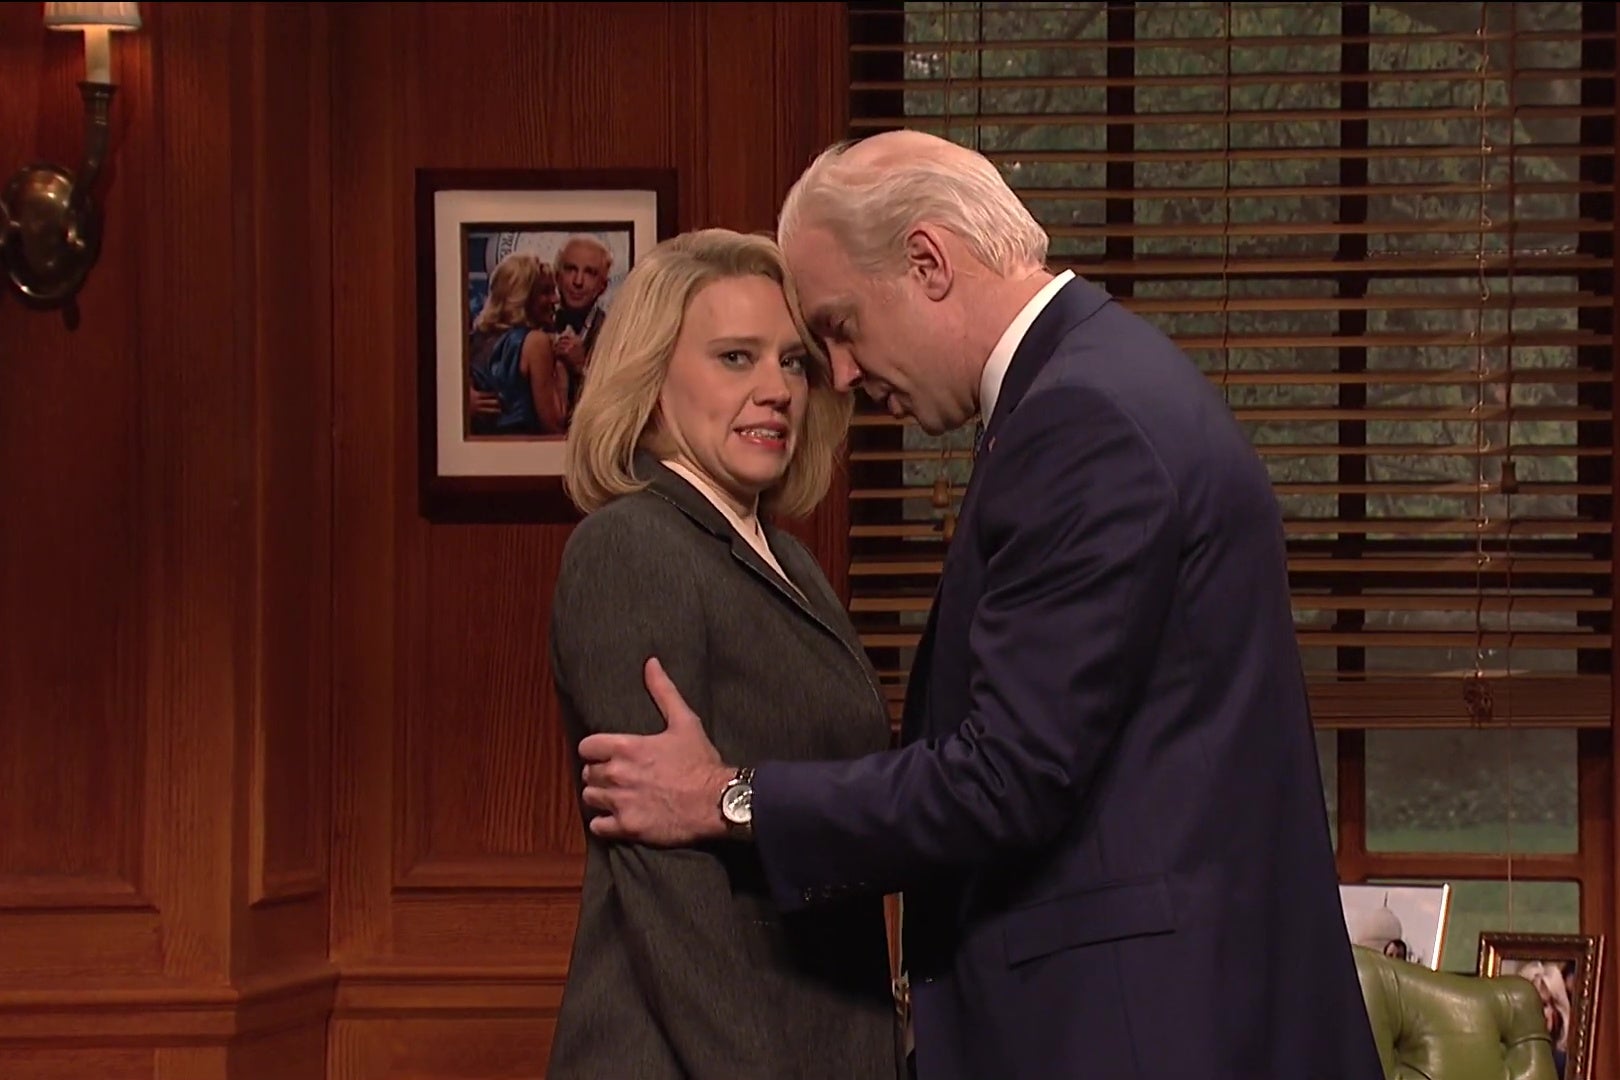 Kate McKinnon grimaces as Jason Sudeikis, as Joe Biden, holds her shoulders and rubs his nose against hers in this still from Saturday Night Live.